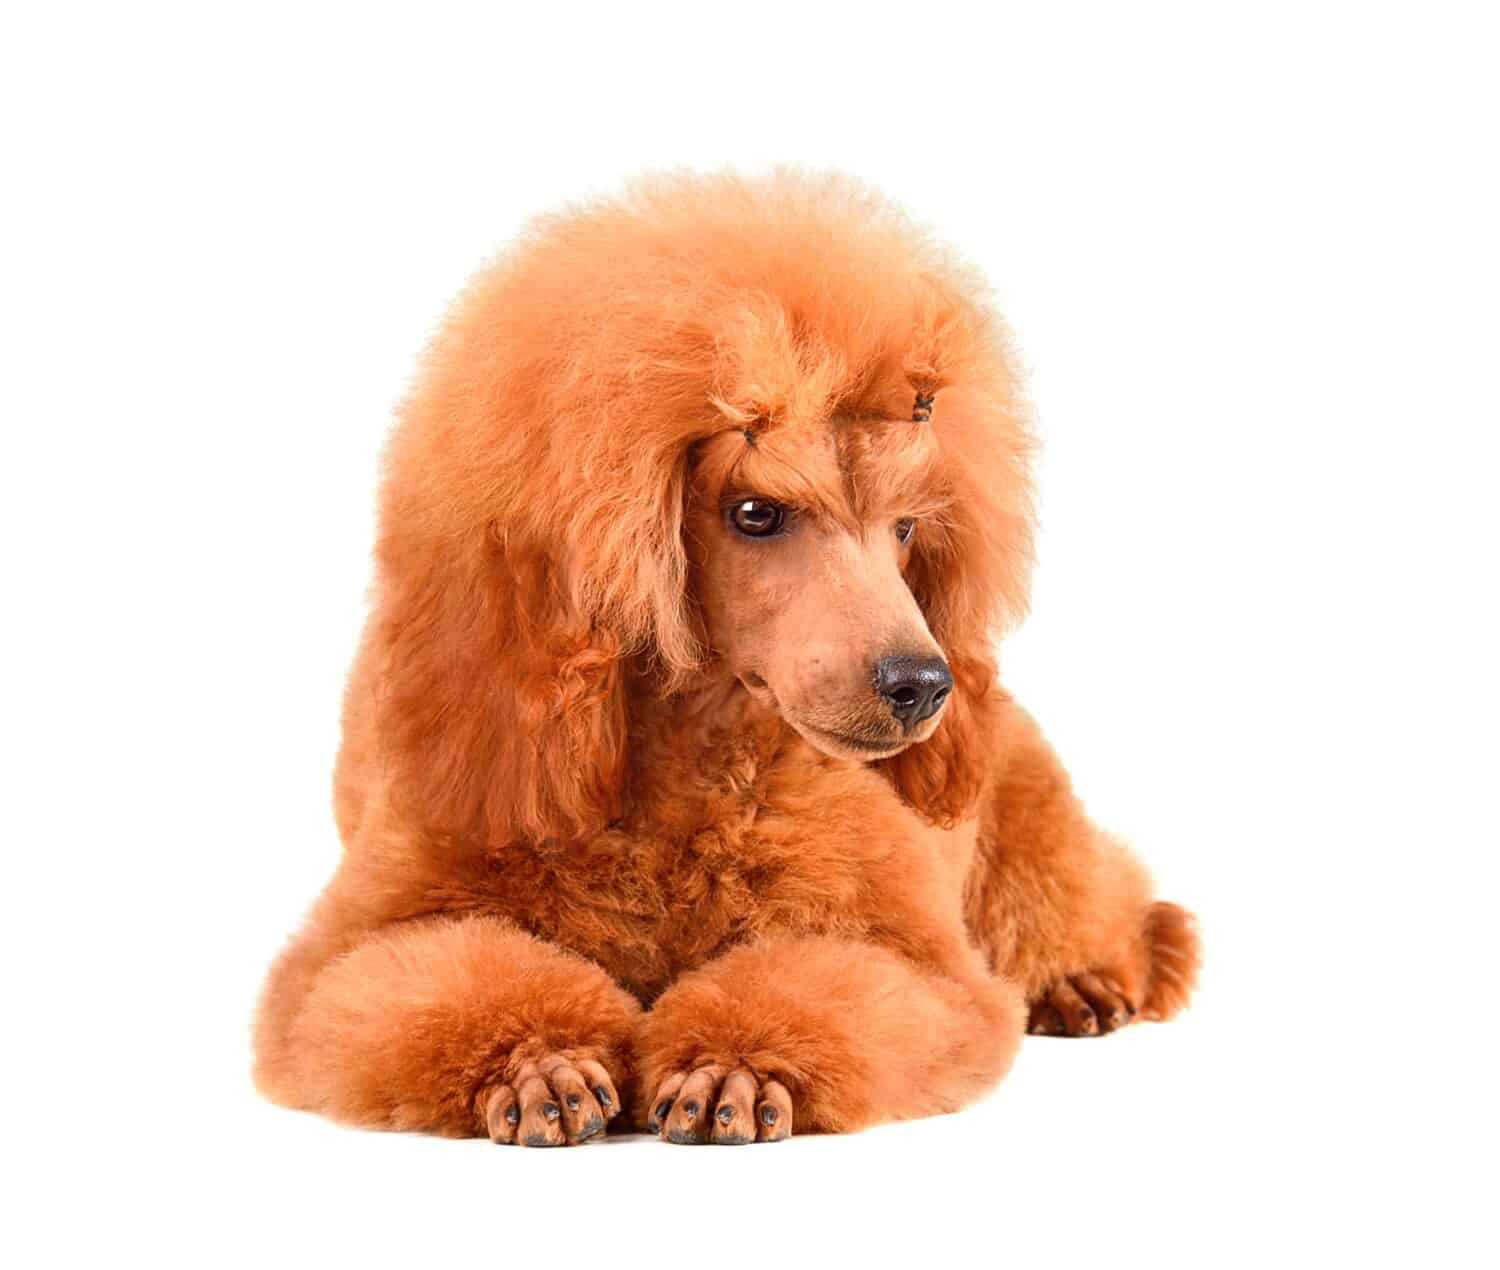 Six months old puppy of apricot poodle resting on a white background